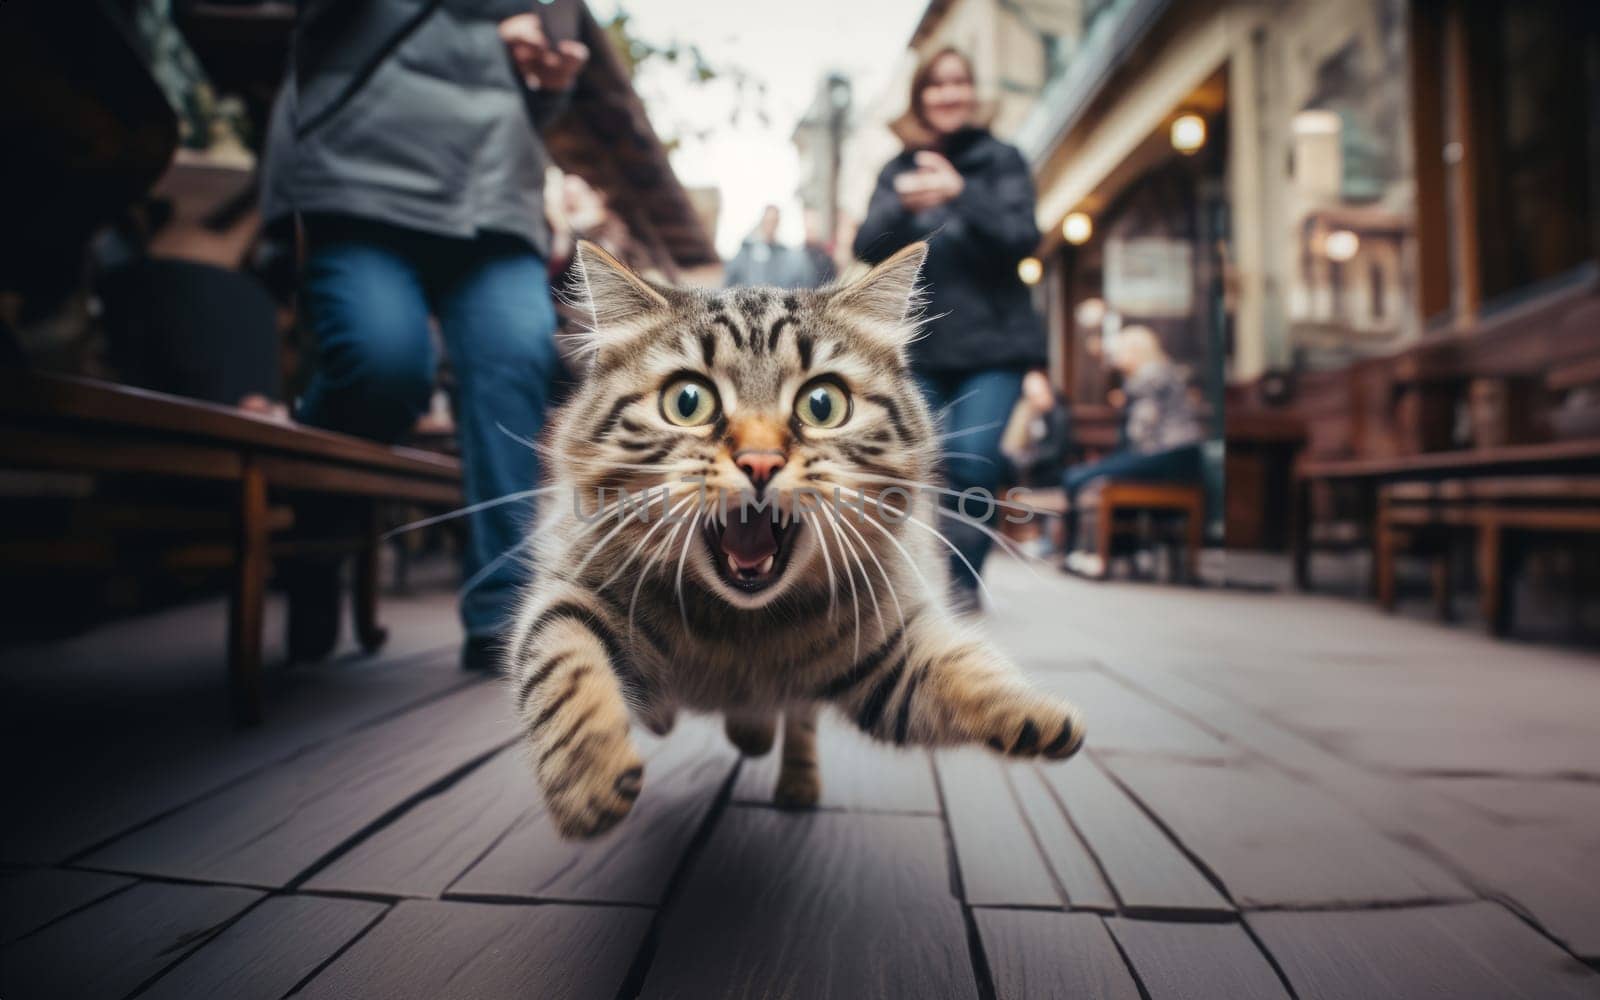 A close-up photograph captures a cat dashing through the urban streets with agility and speed, amidst the bustling cityscape by dotshock